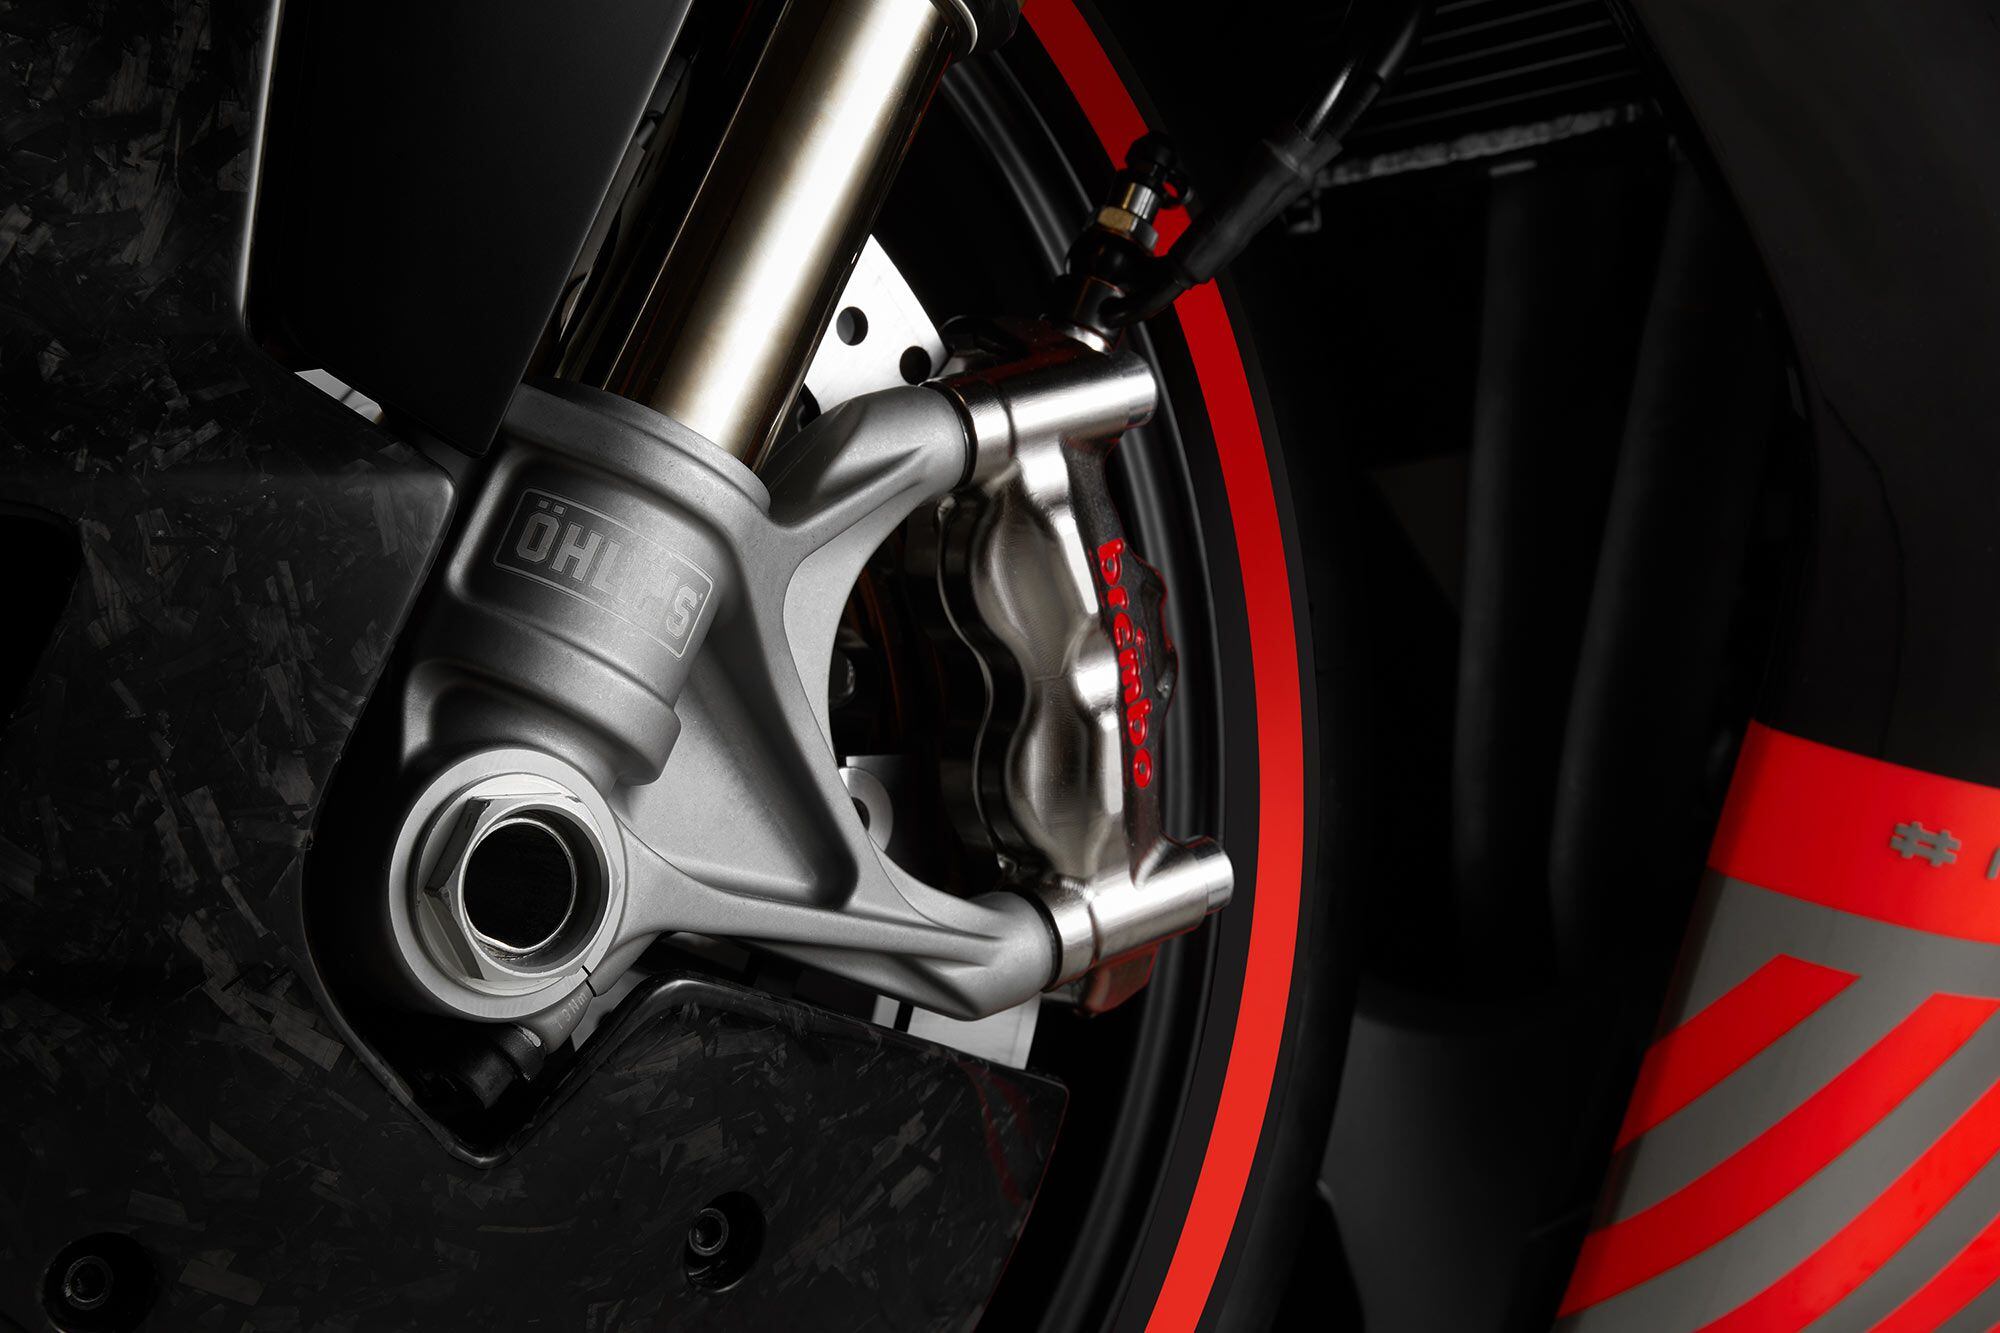 Higher-end components like Öhlins suspension and Brembo brakes suggest it may be a running bike rather than a mock-up.